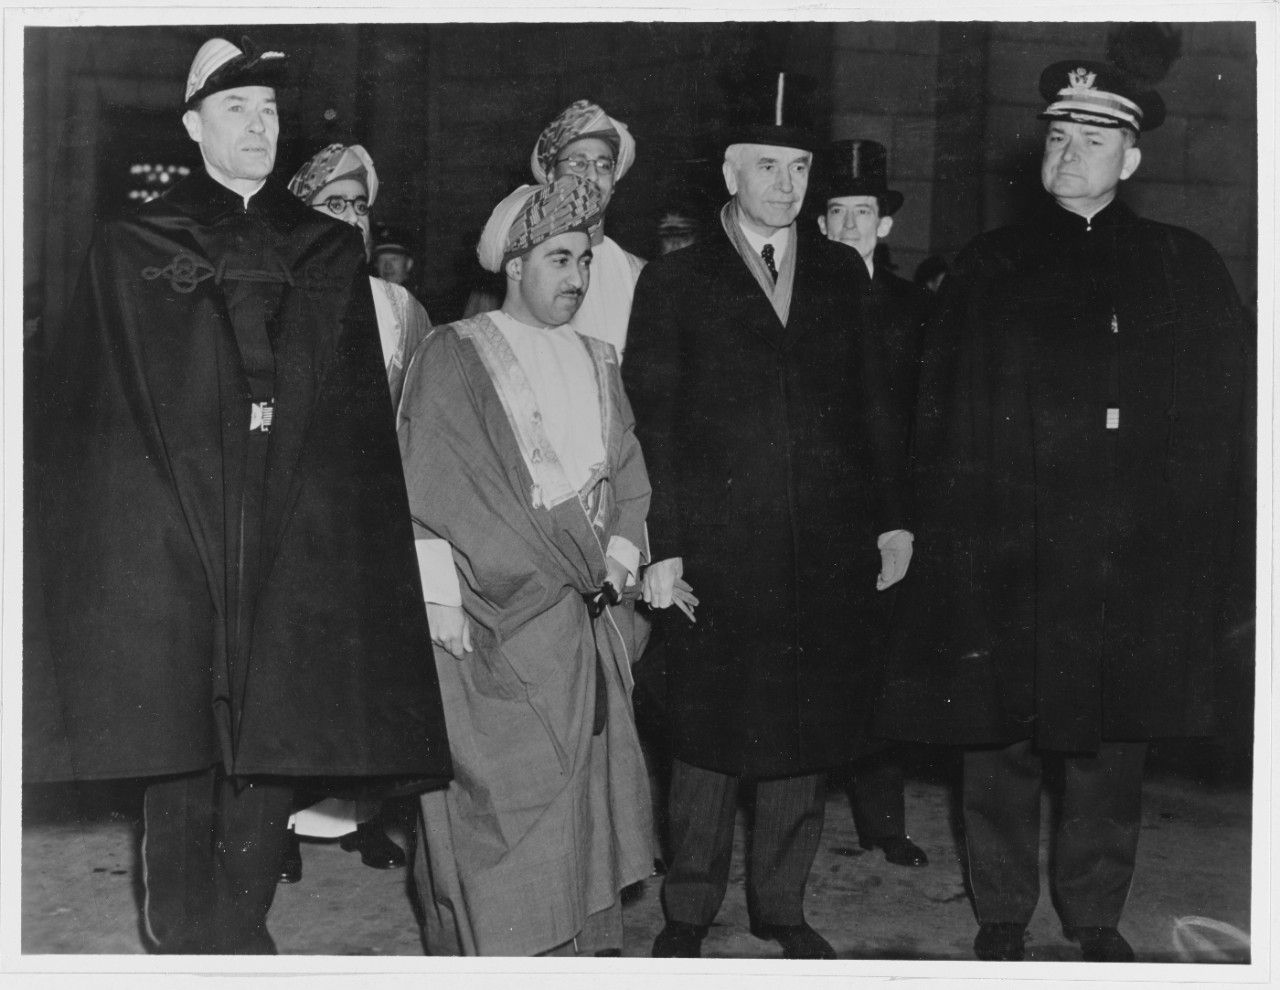 The Sultan of Muscat and Oman with Captain Woodson, Secretary Hull, and Colonel E. Watson. March 1938